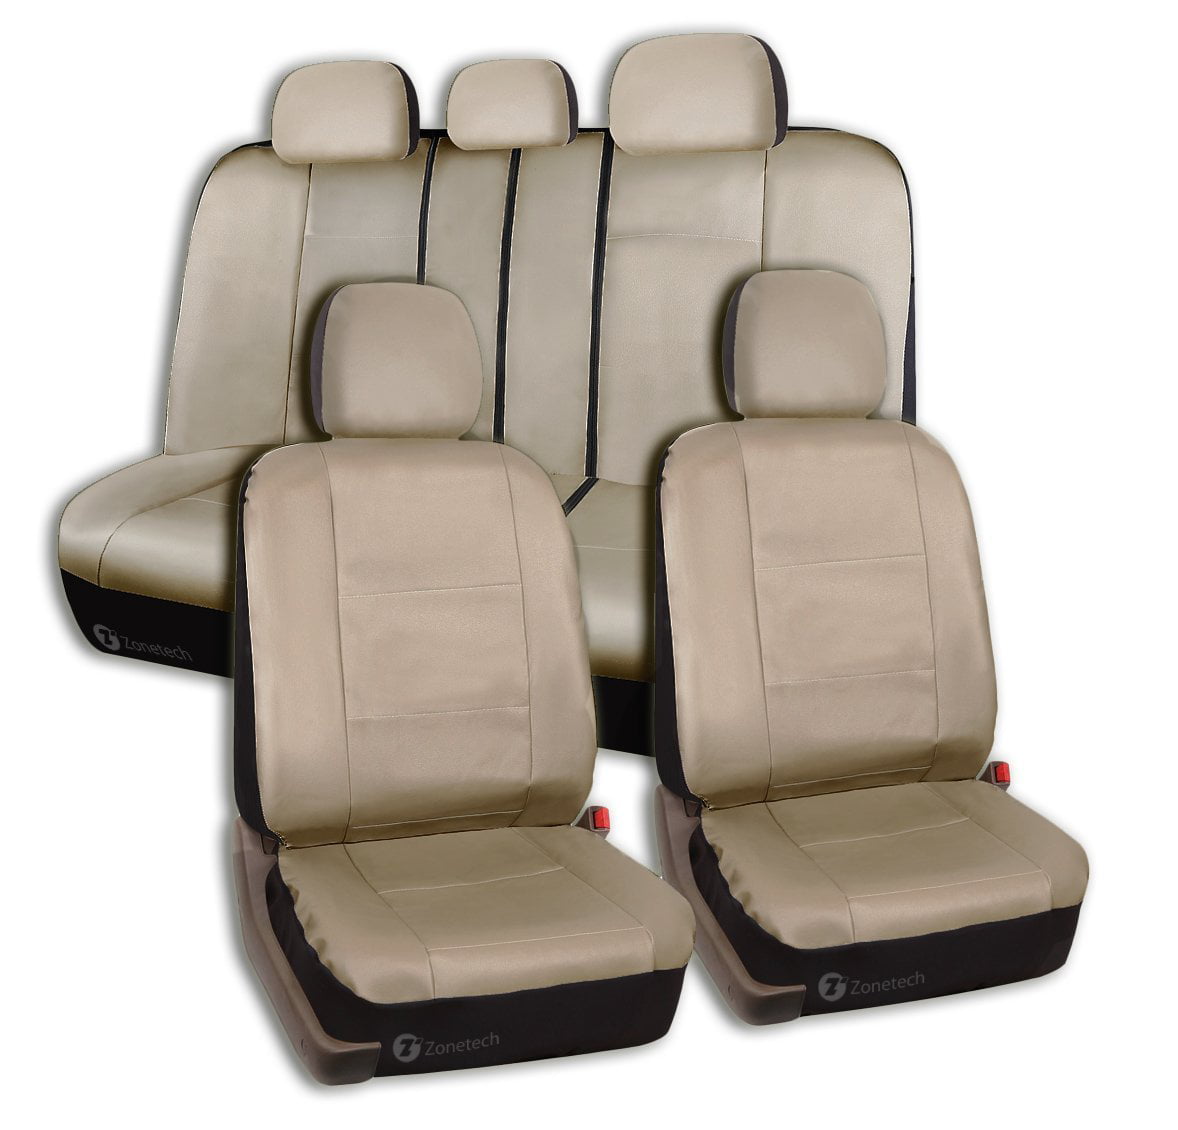 Zone Tech Pu Leather Car Seat Covers Classic Beige Tan Leather Front And Back Seat Cover With Straps And Hooks For Easier Installation